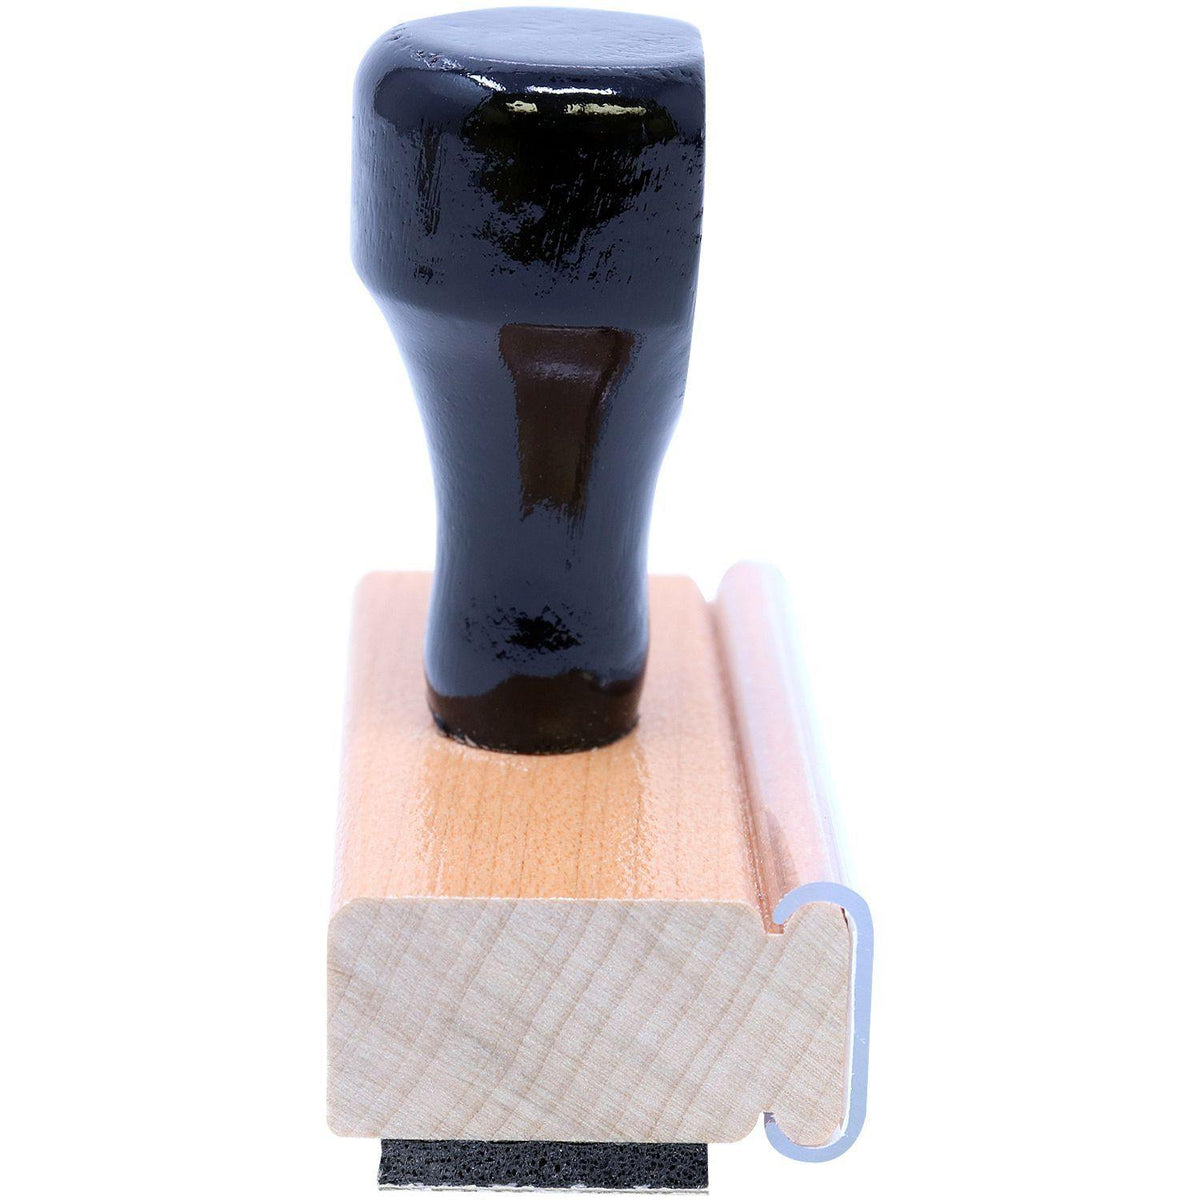 Round This is Wonderful Smiley Rubber Stamp - Engineer Seal Stamps - Brand_Acorn, Impression Size_Small, Stamp Type_Regular Stamp, Type of Use_General, Type of Use_Teacher